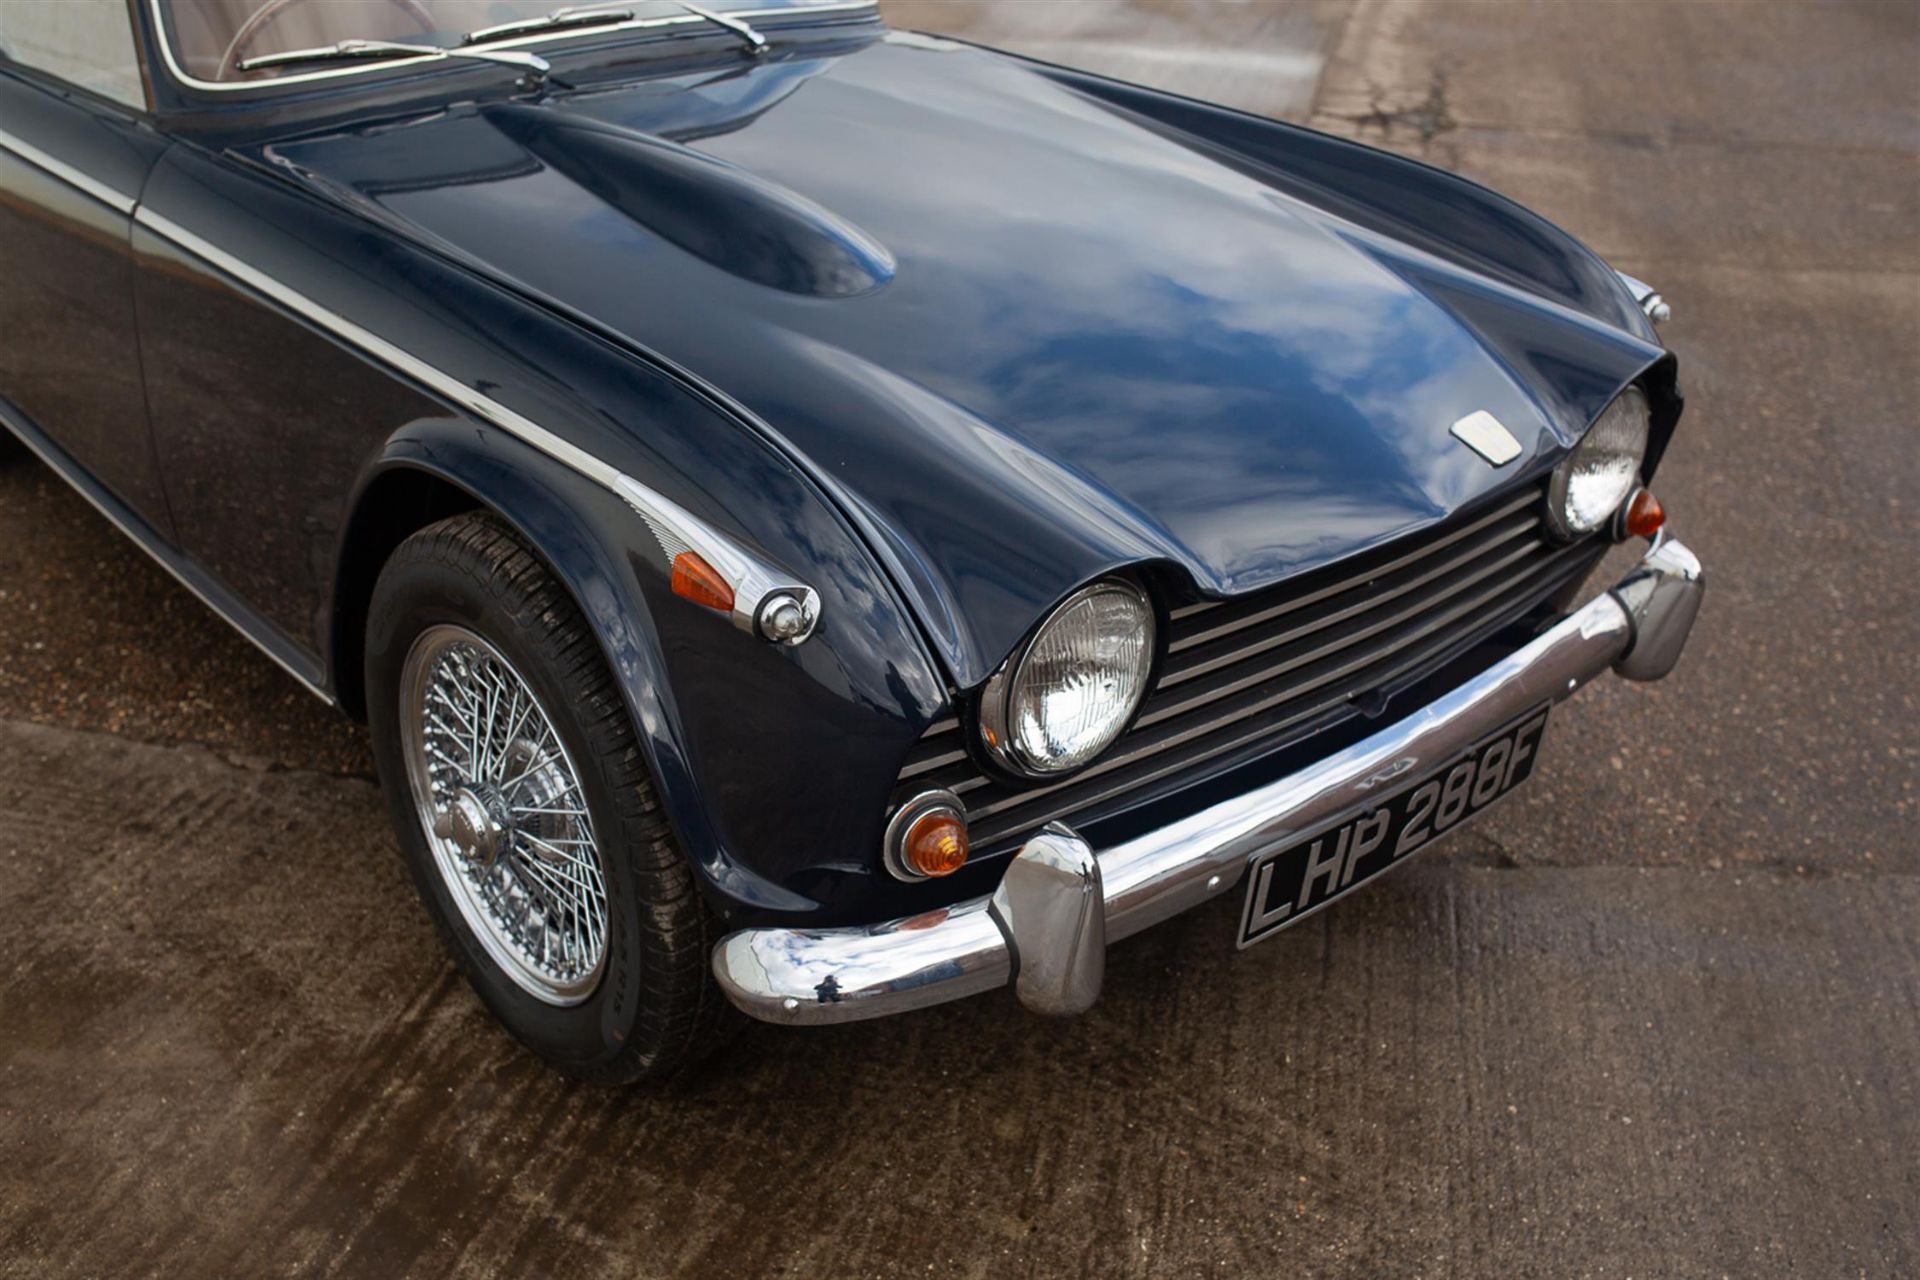 1967 Triumph TR5 - The First Ever TR5 - Image 8 of 10